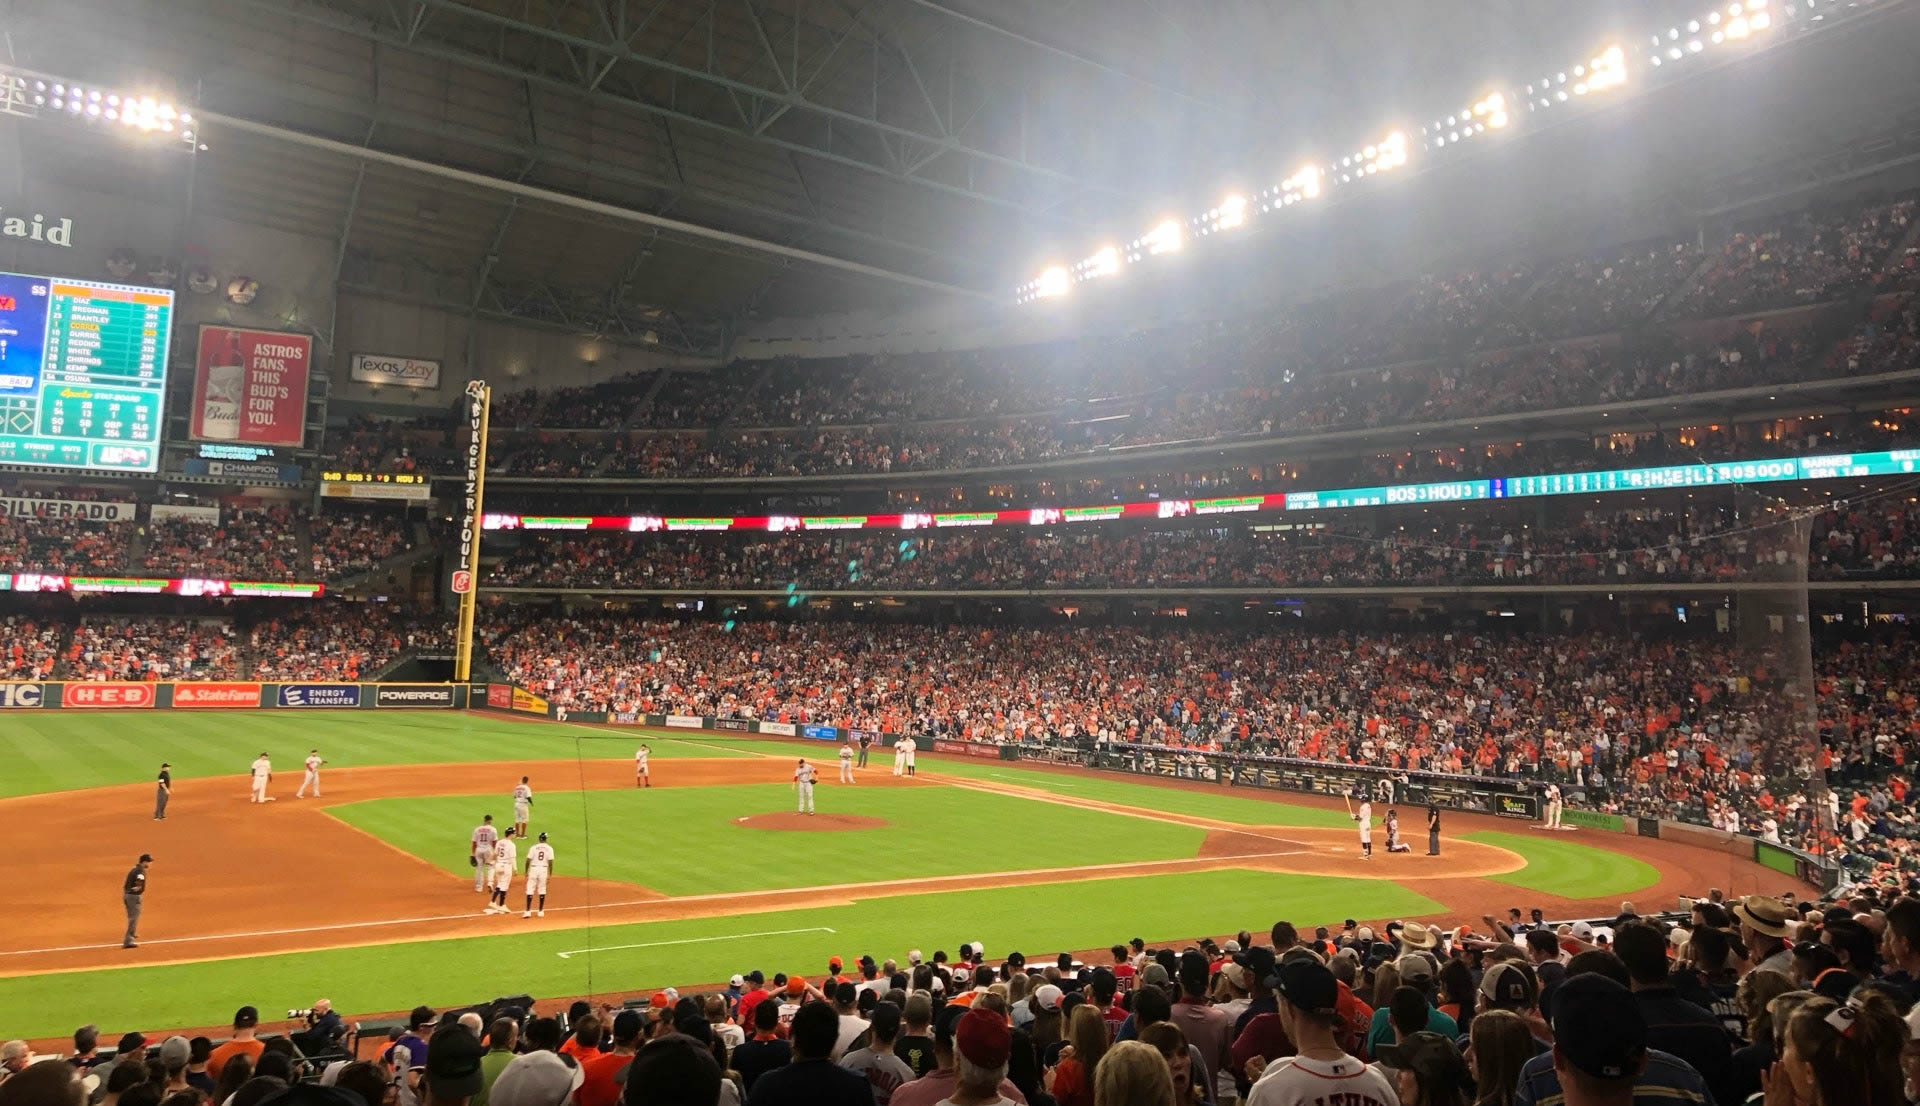 section 111, row 20 seat view  for baseball - minute maid park